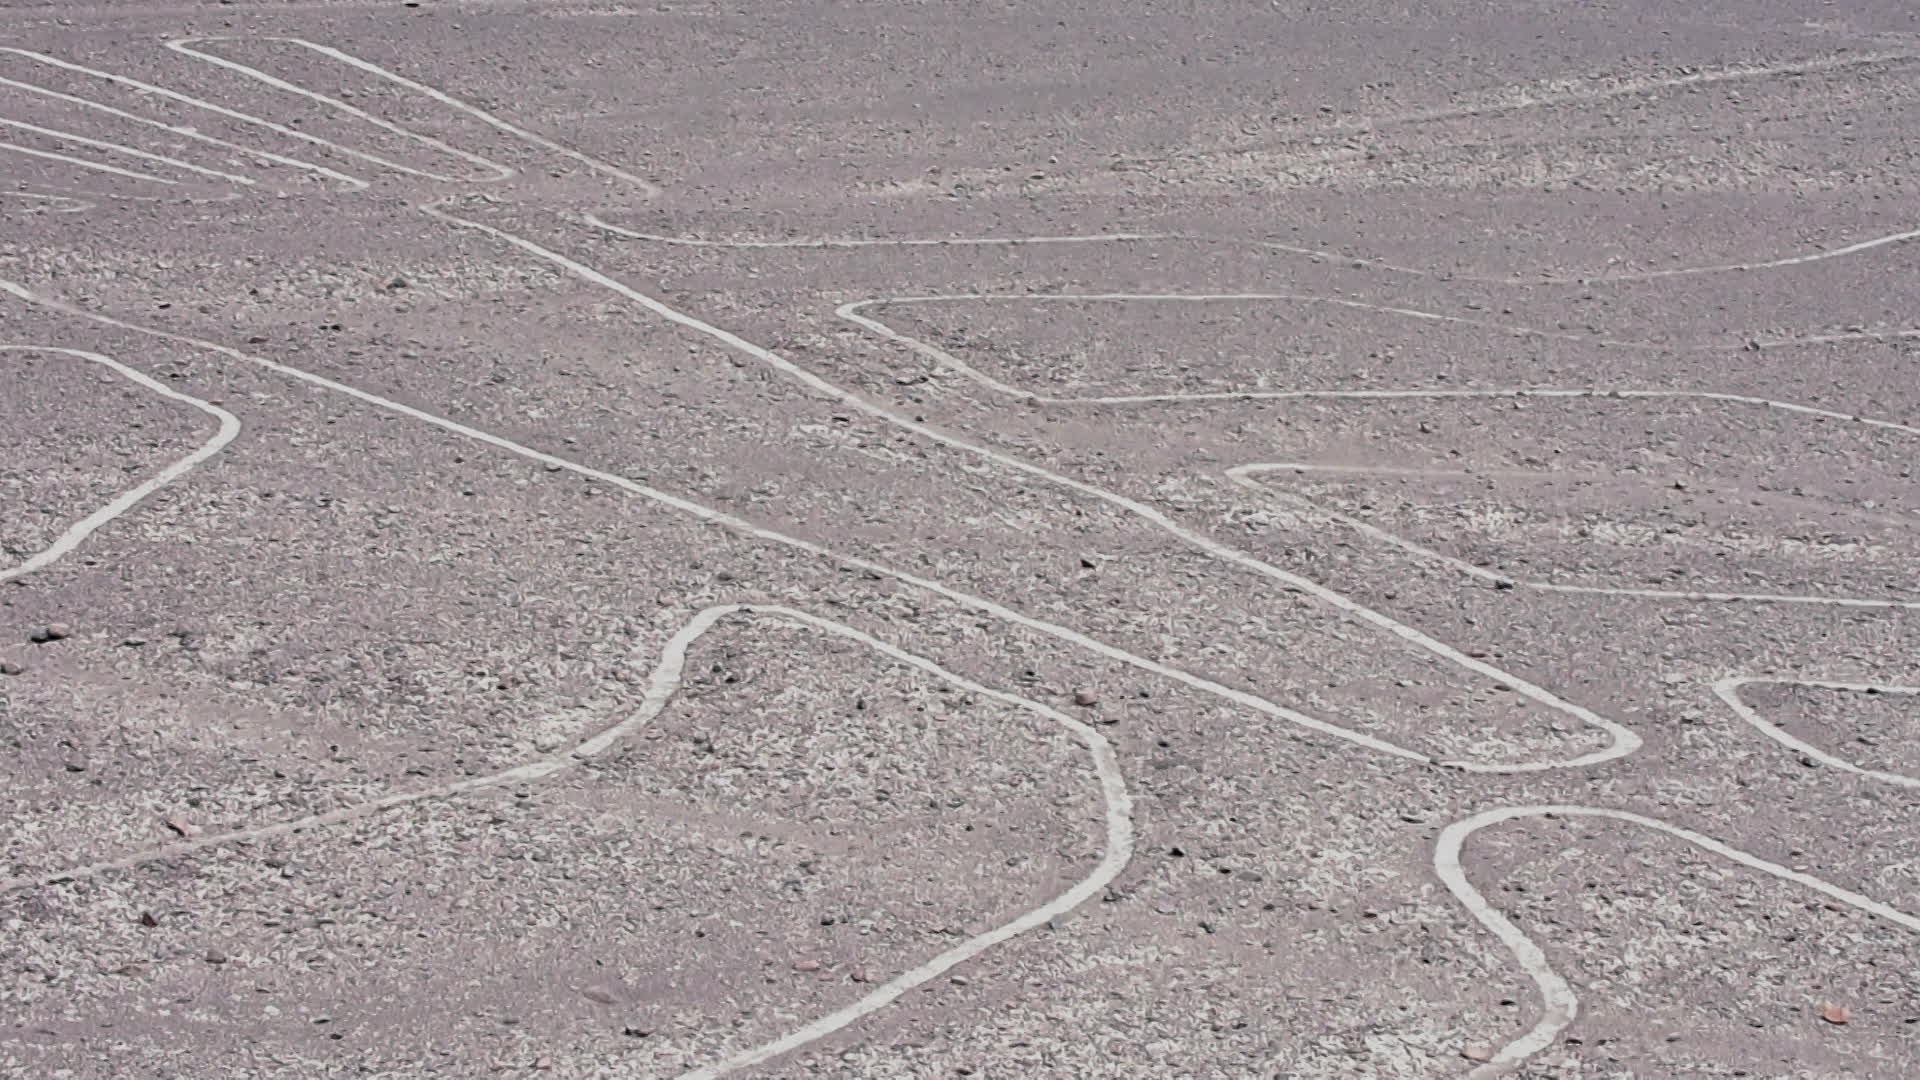 Unlocking the Secrets of the Nazca Lines